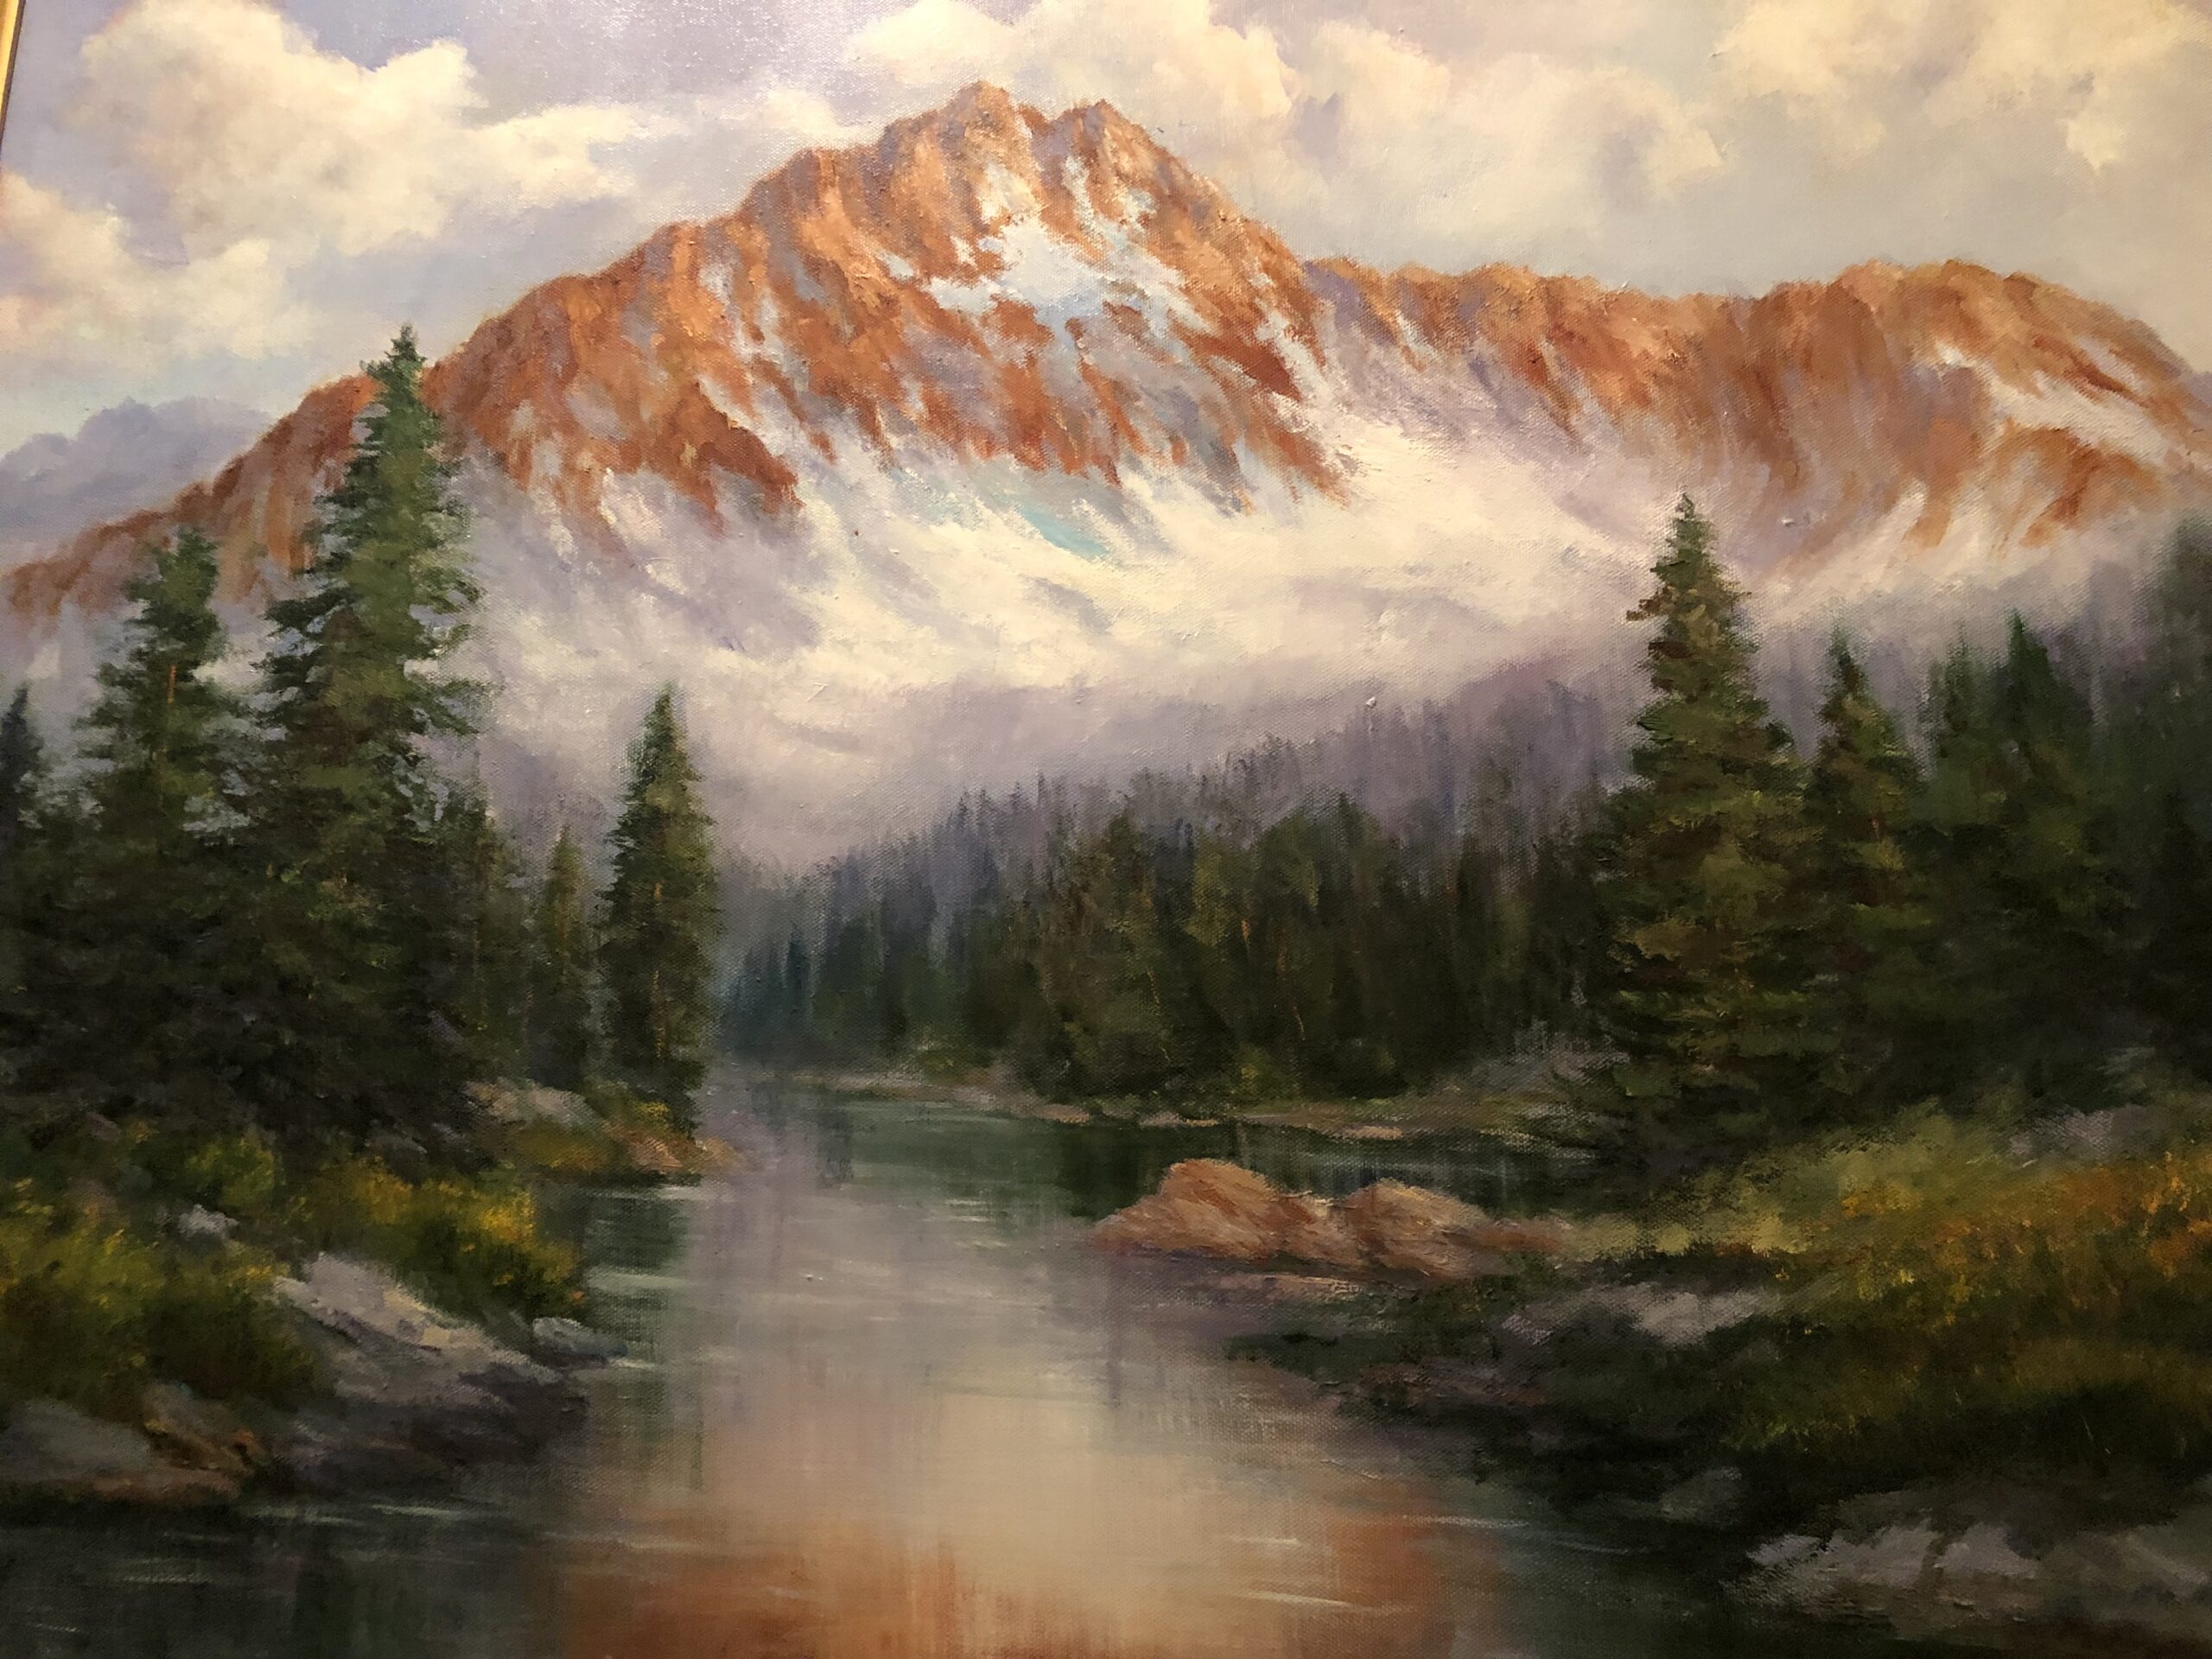 Cathedral Mountain | Oil on Canvas, 2021 | Carol Rusaw